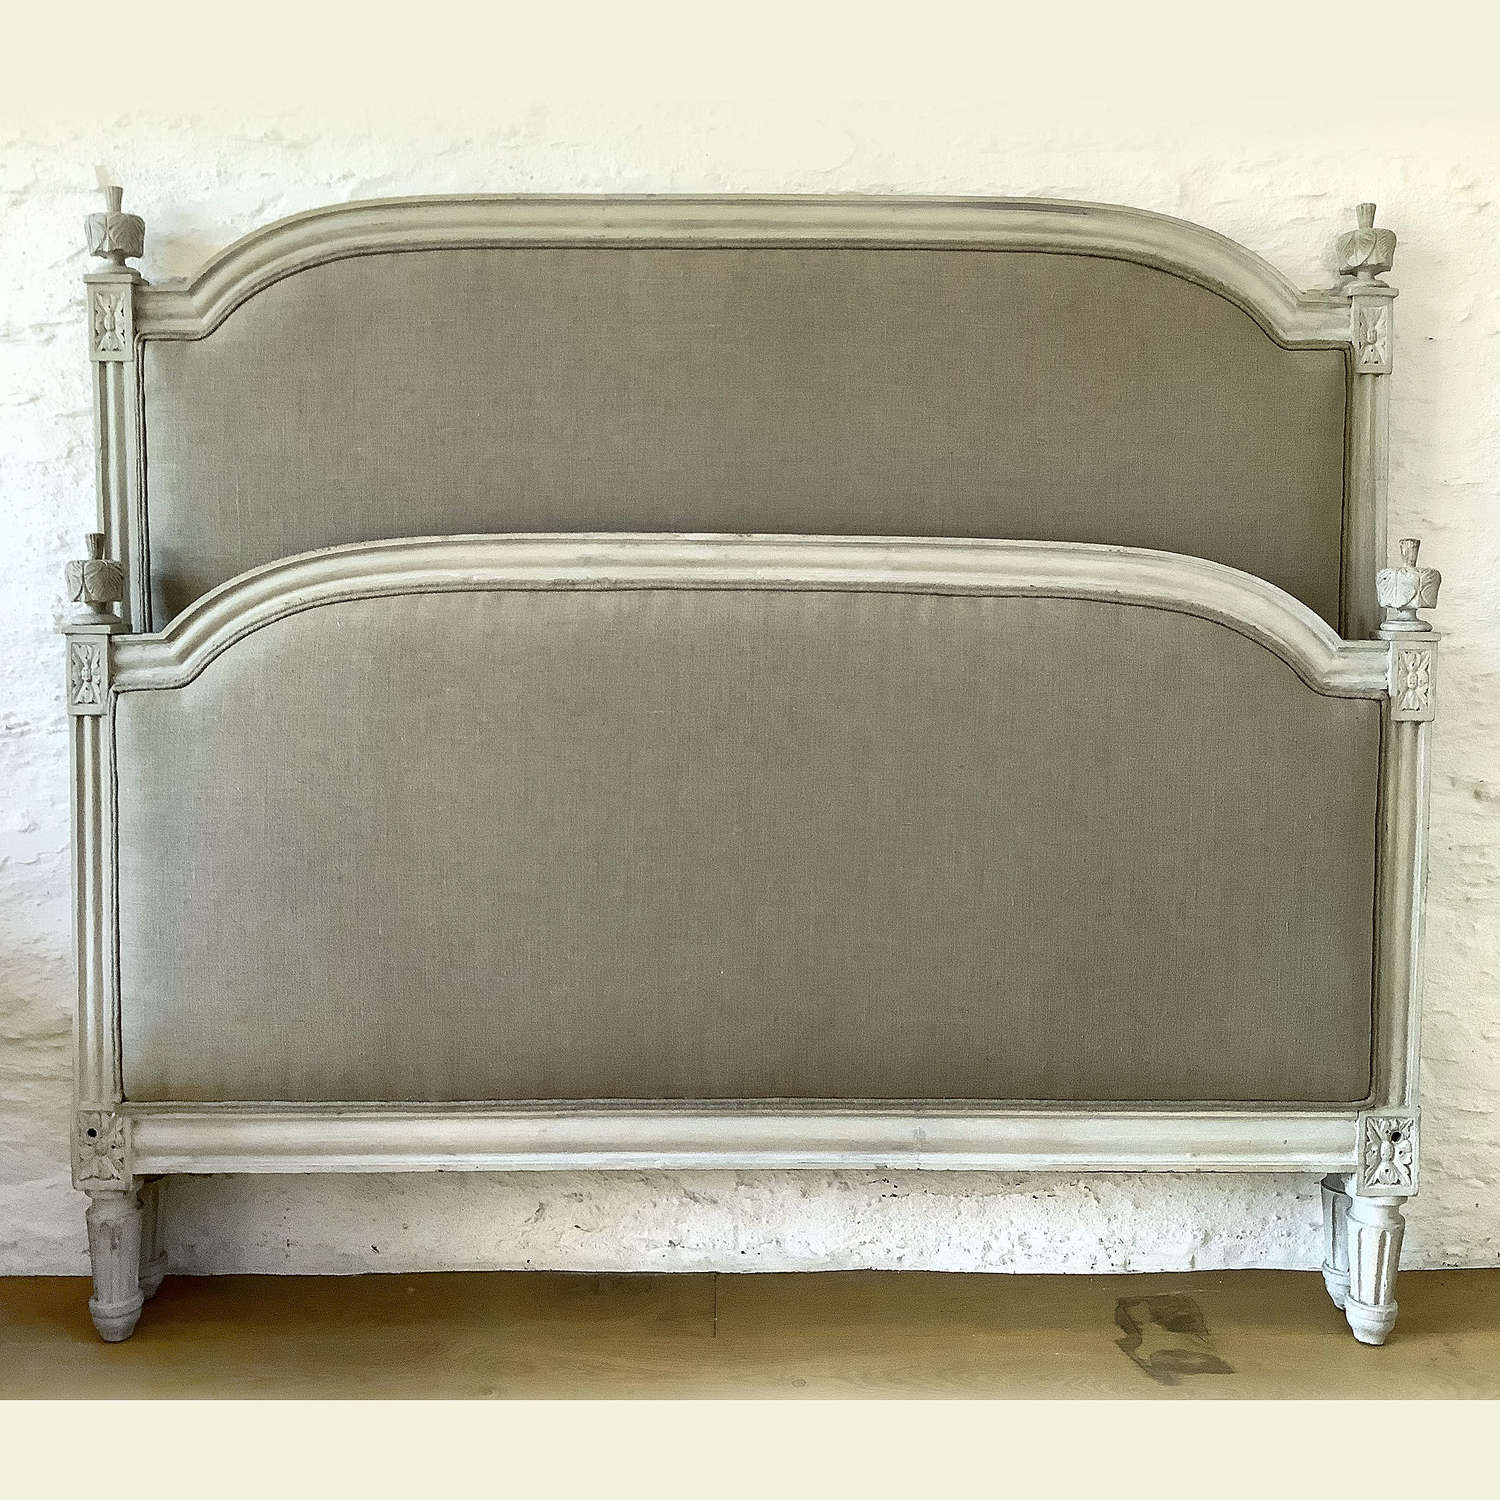 19th Century Louis XVI stryle king size bedstead